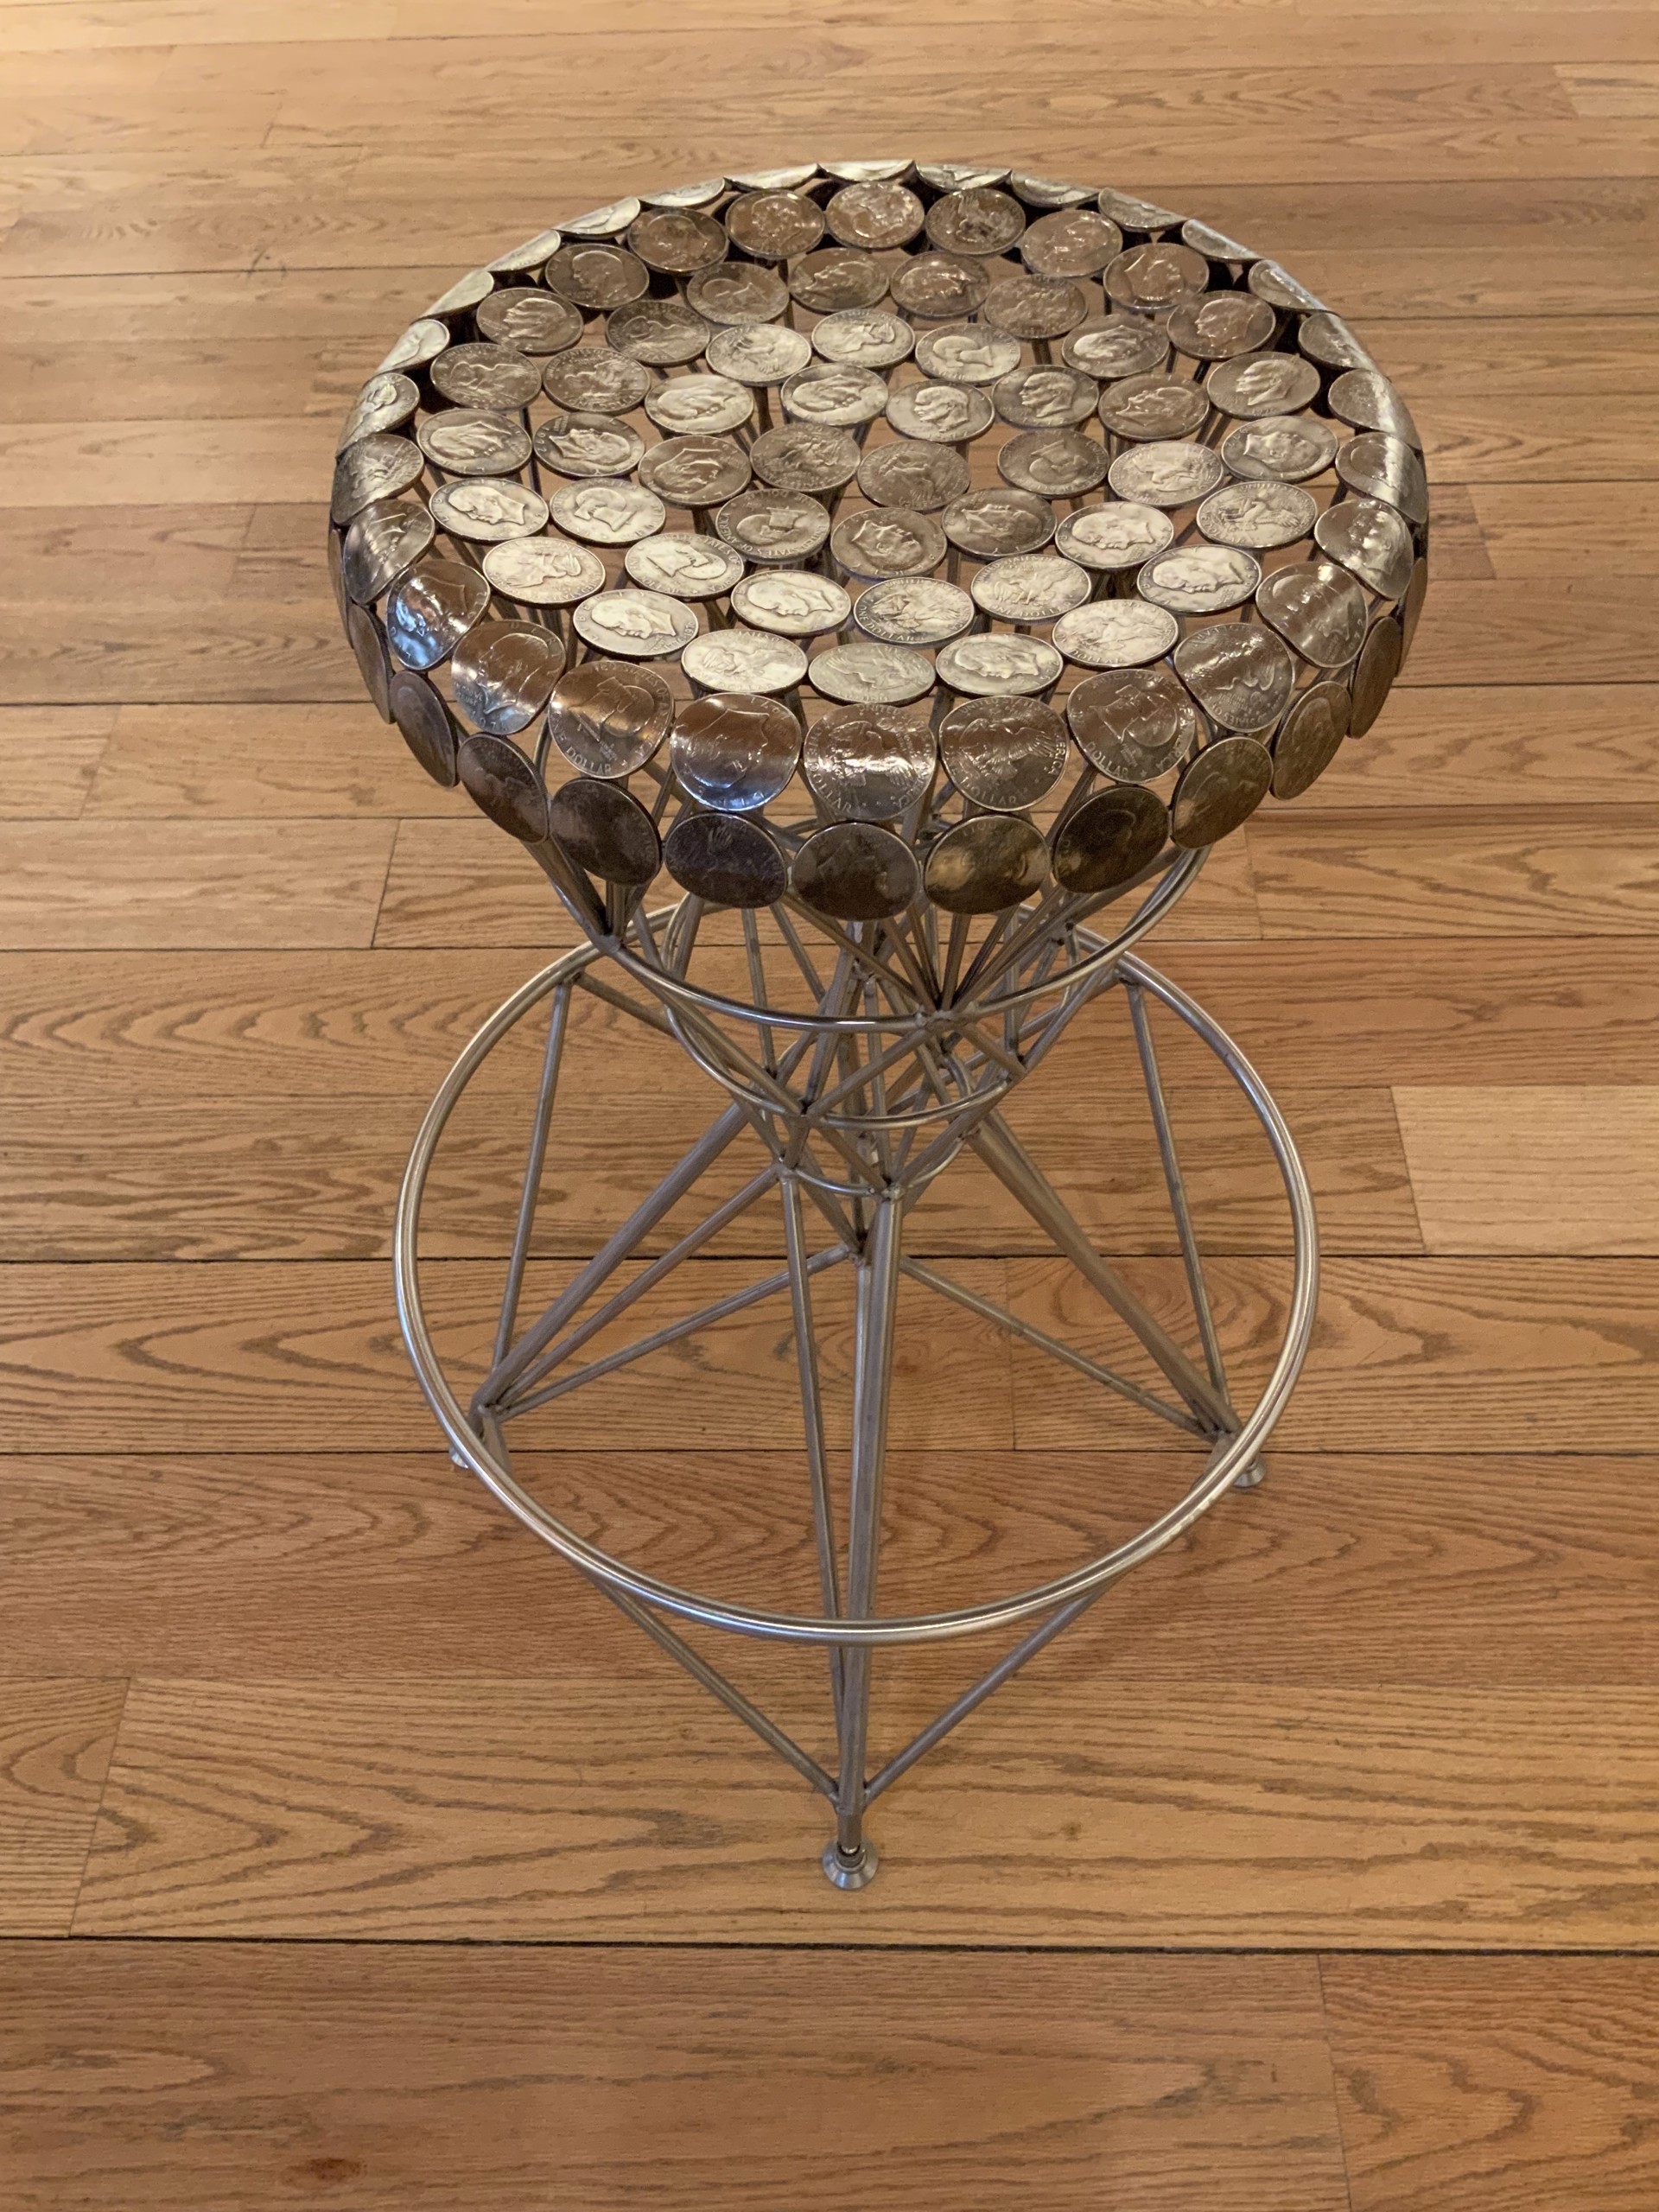 One Dollar Currencies stool by Johnny Swing